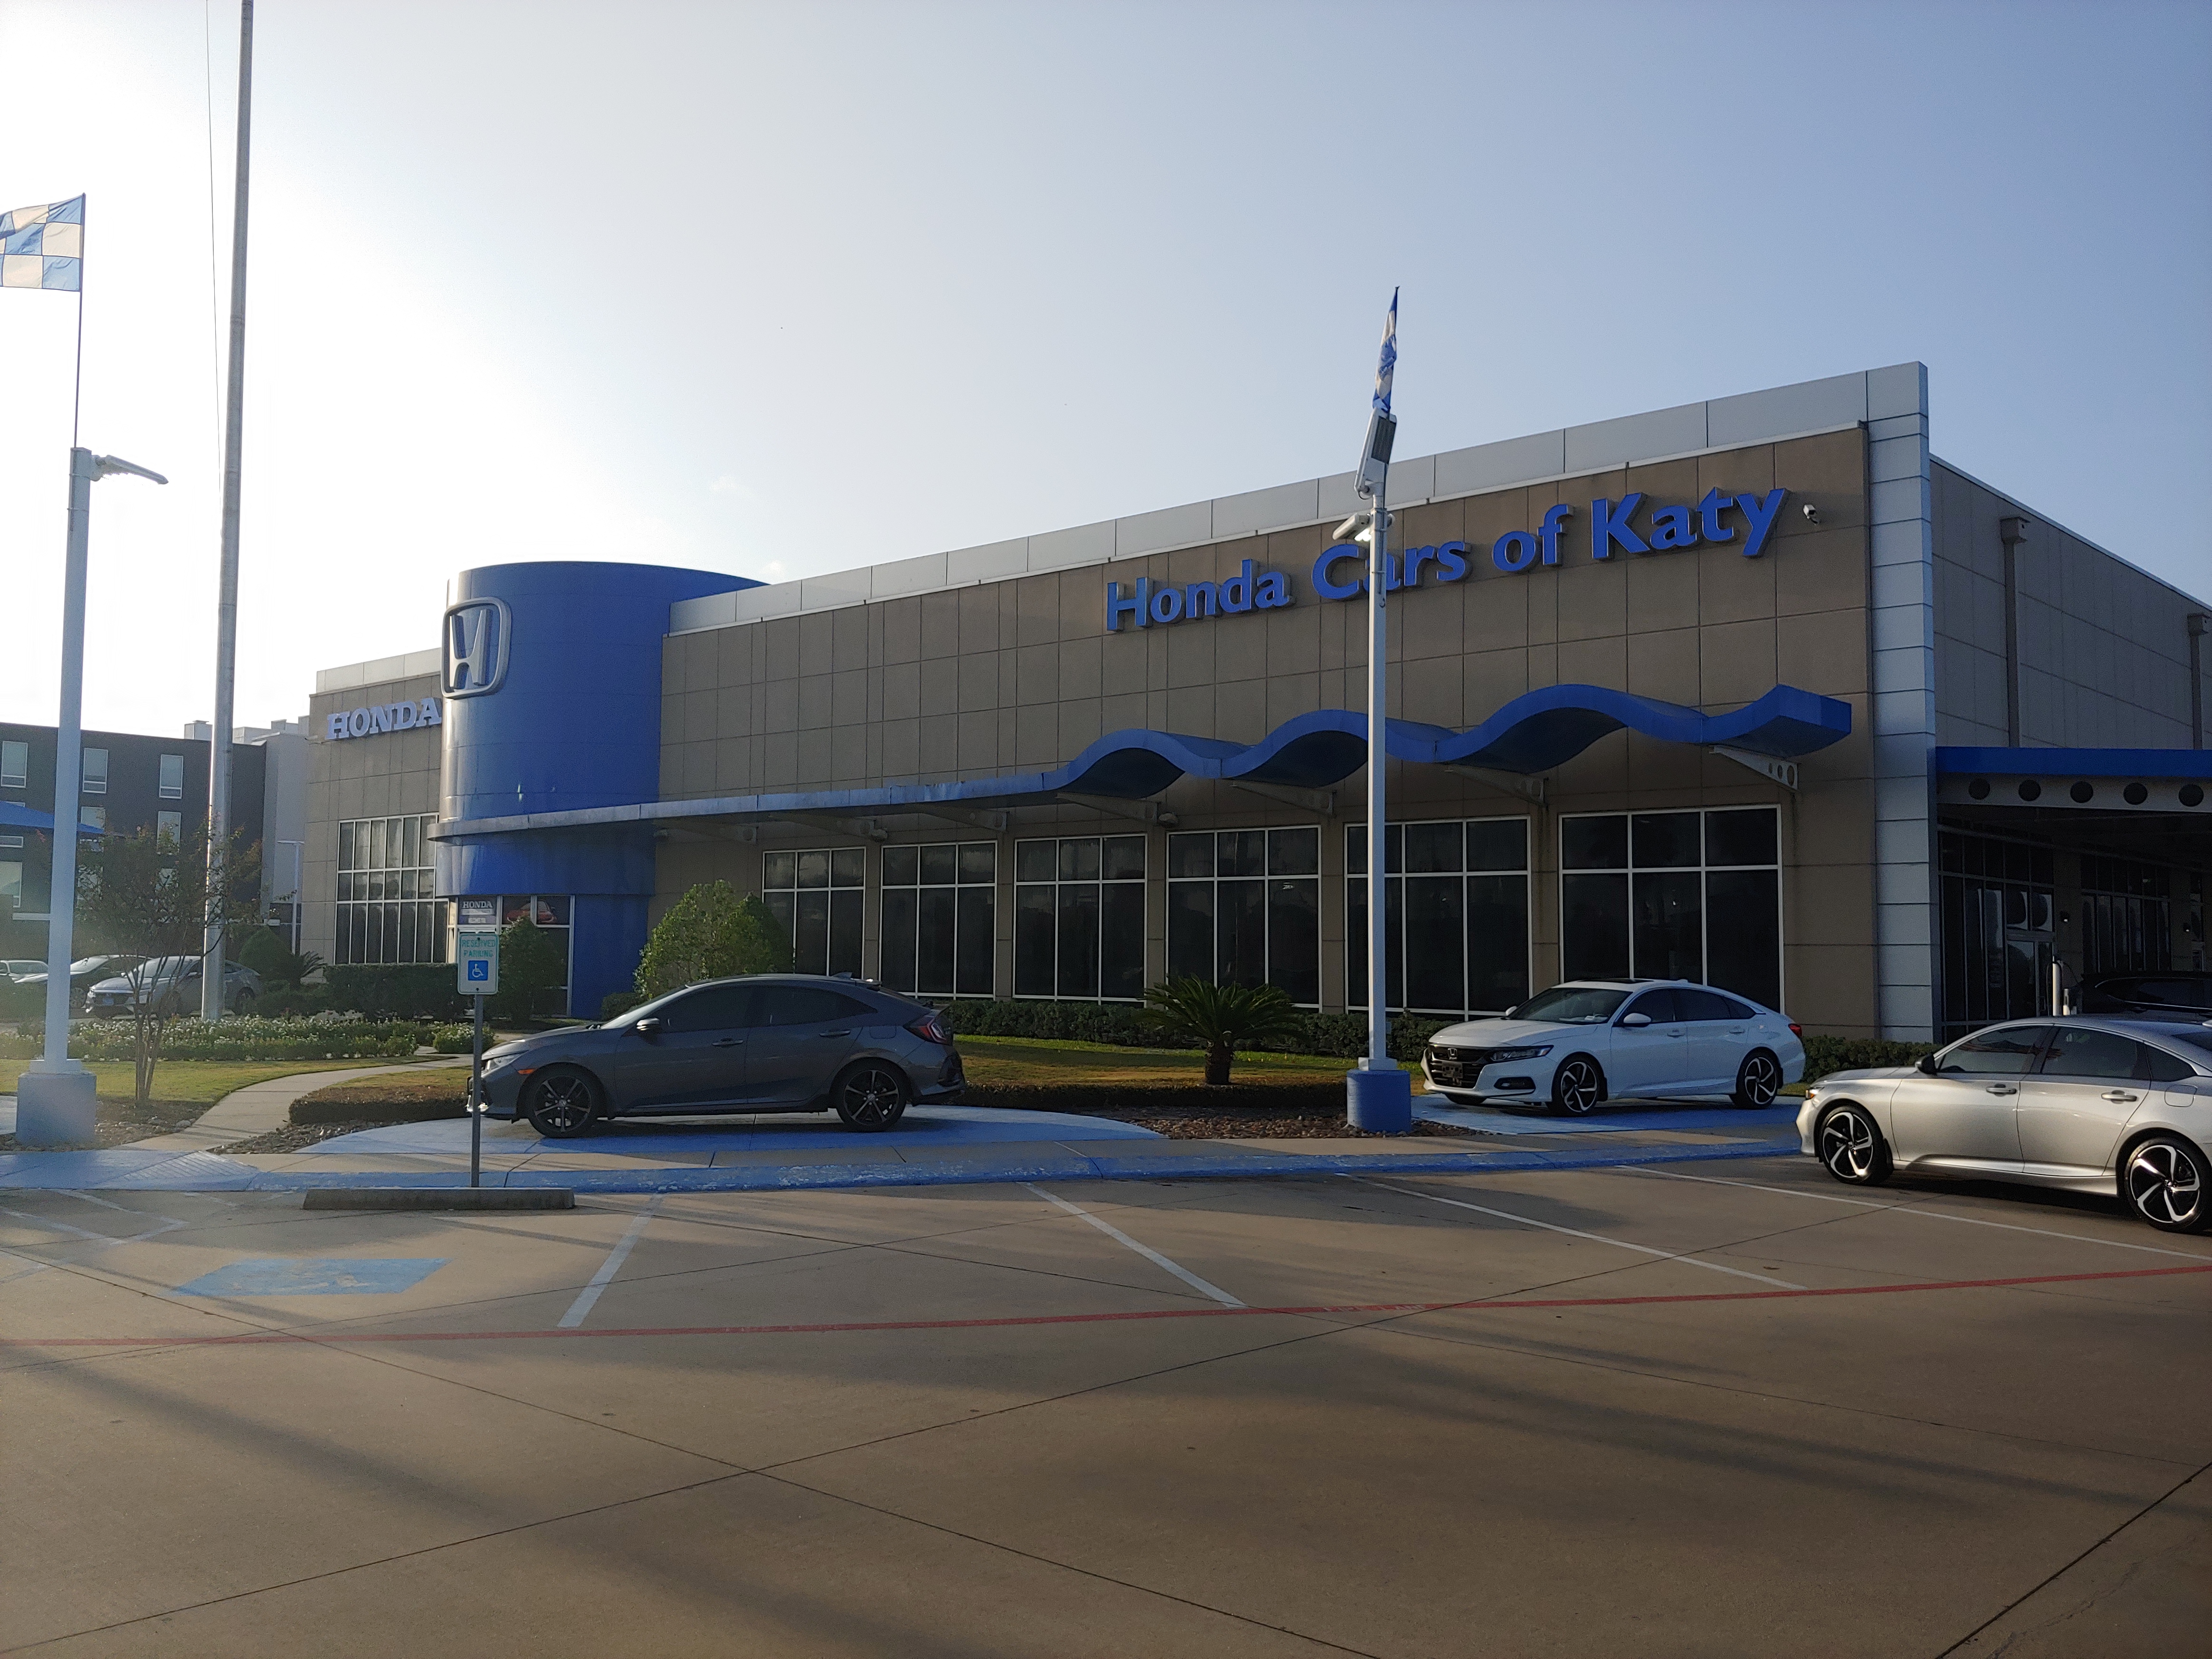 katy certified pre-owned specials at honda cars of katy on honda cars of katy service department